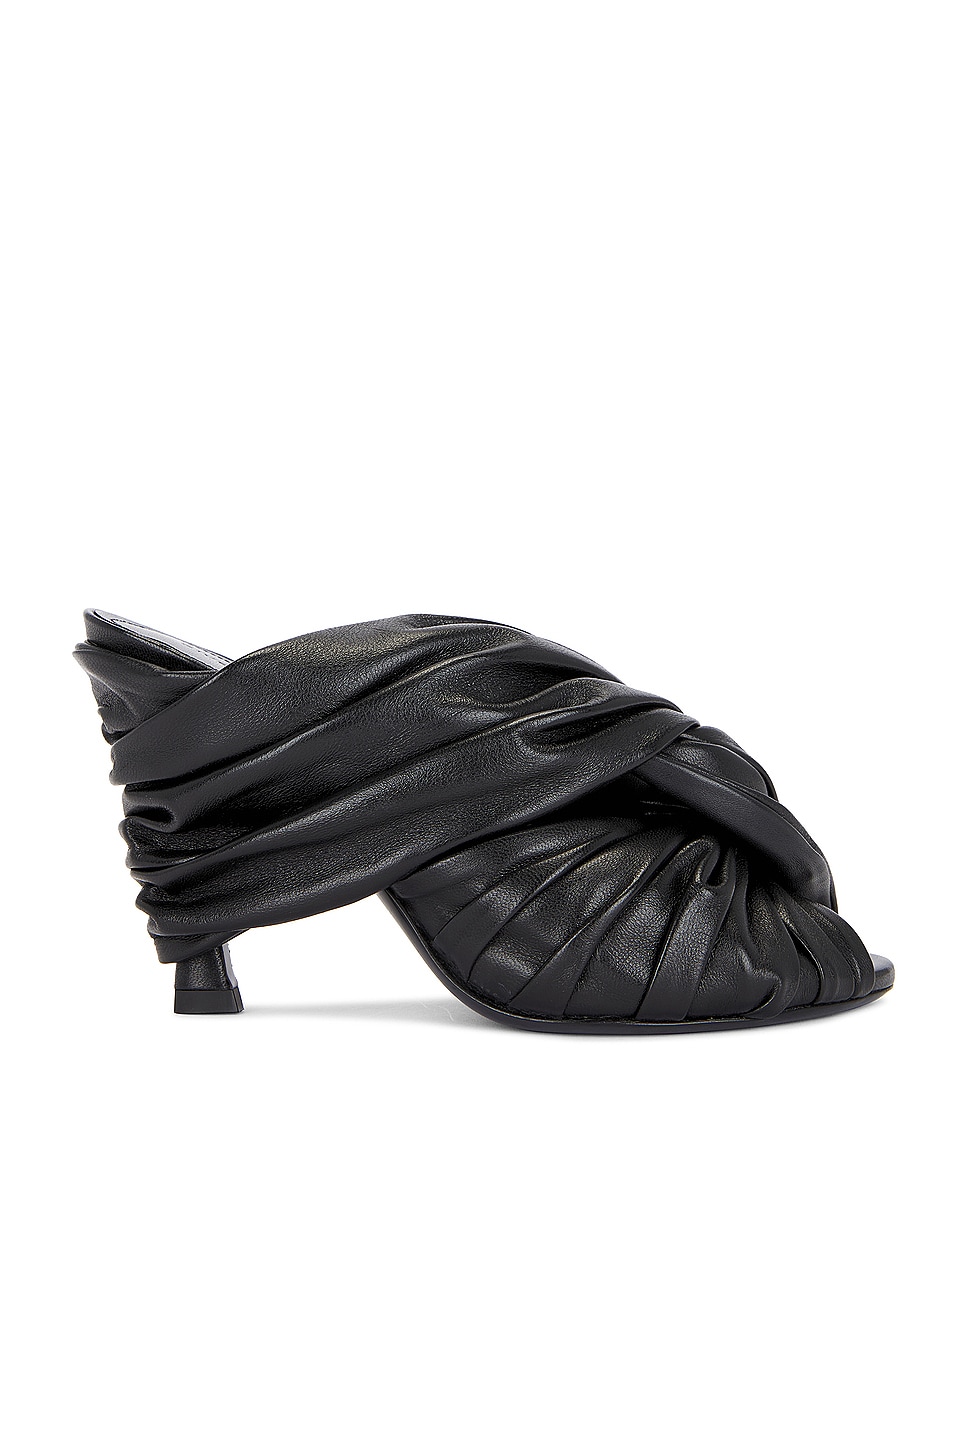 Image 1 of Givenchy Show Twist Mule in Black